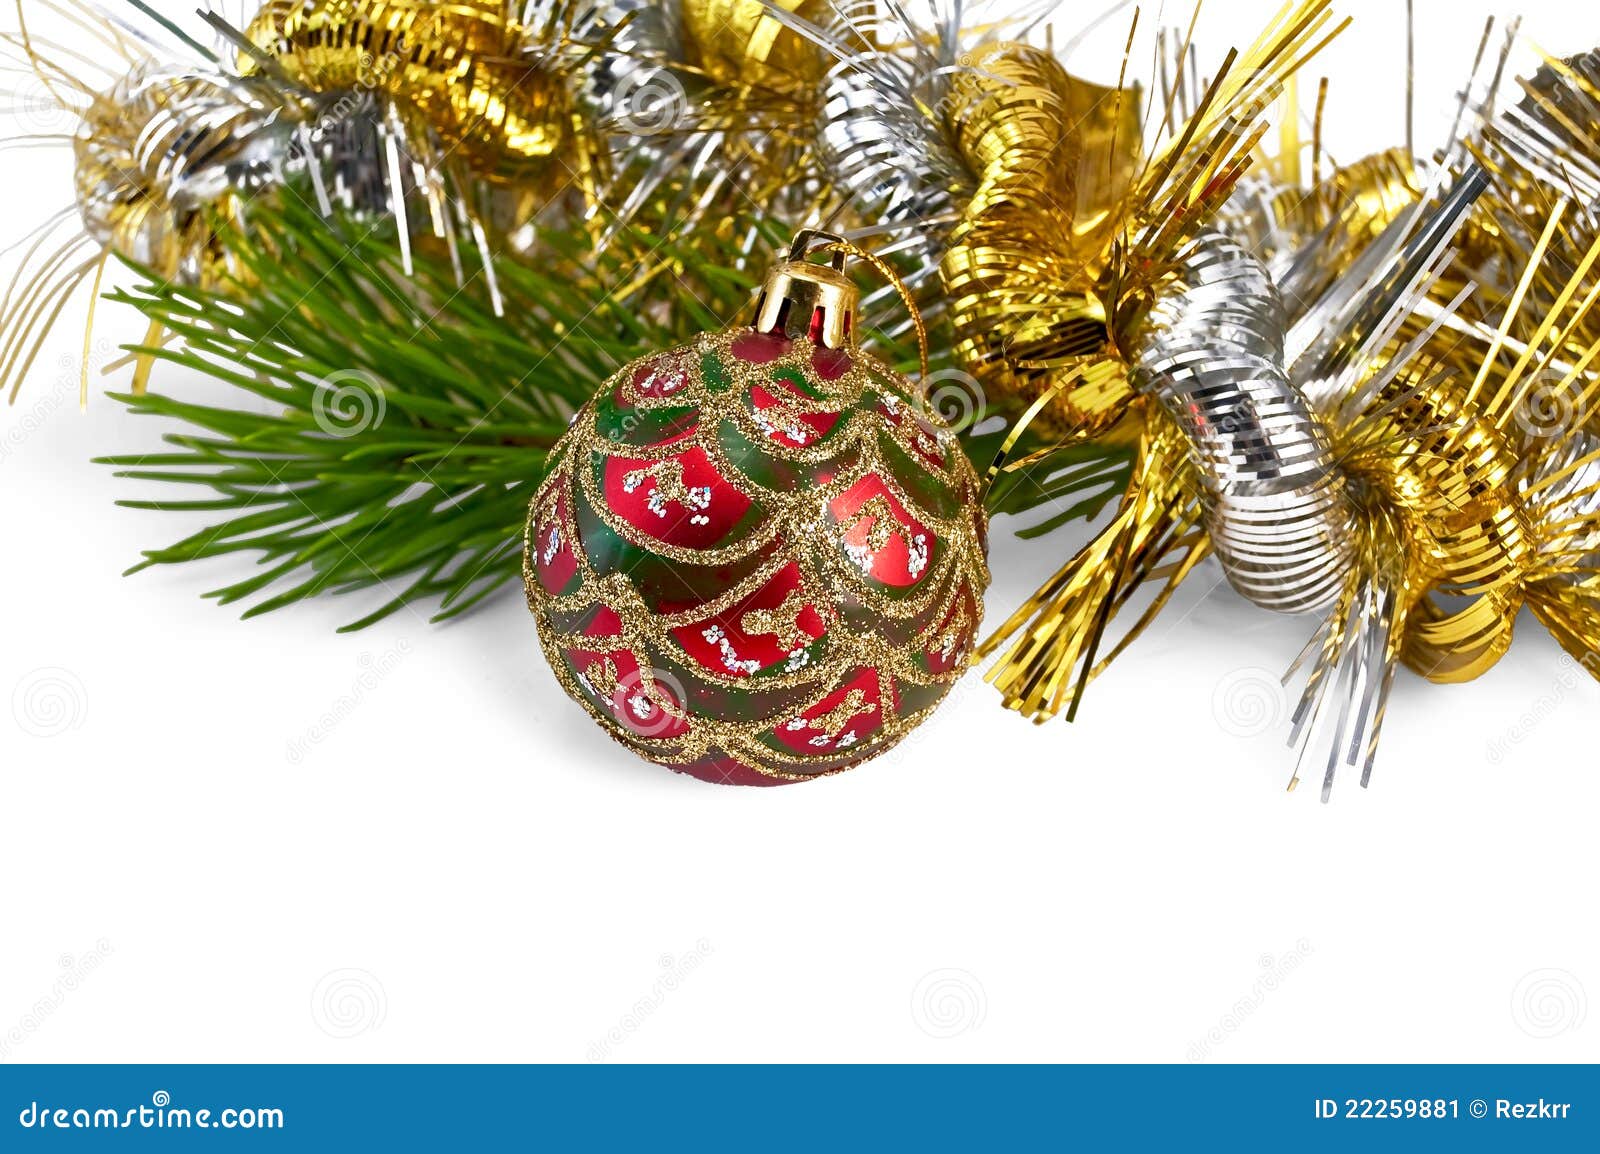 Christmas Red Ball with Pine Branch Stock Image - Image of celebration ...